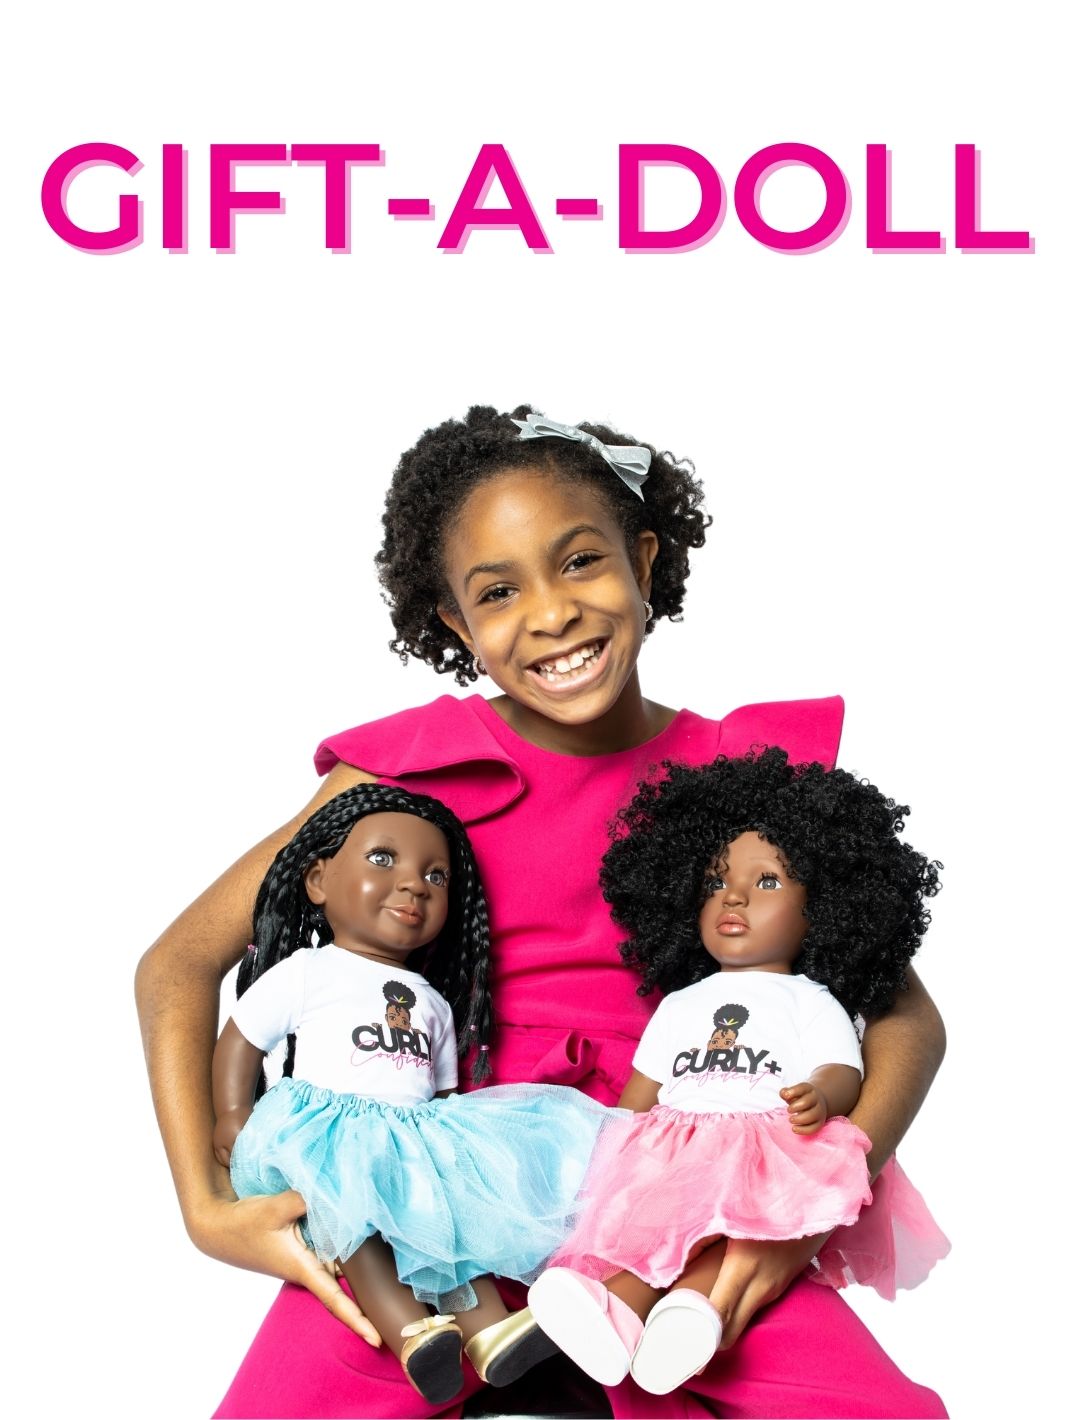 Donation Doll Only - #GiftADoll-Dolls-Beautiful Curly Me